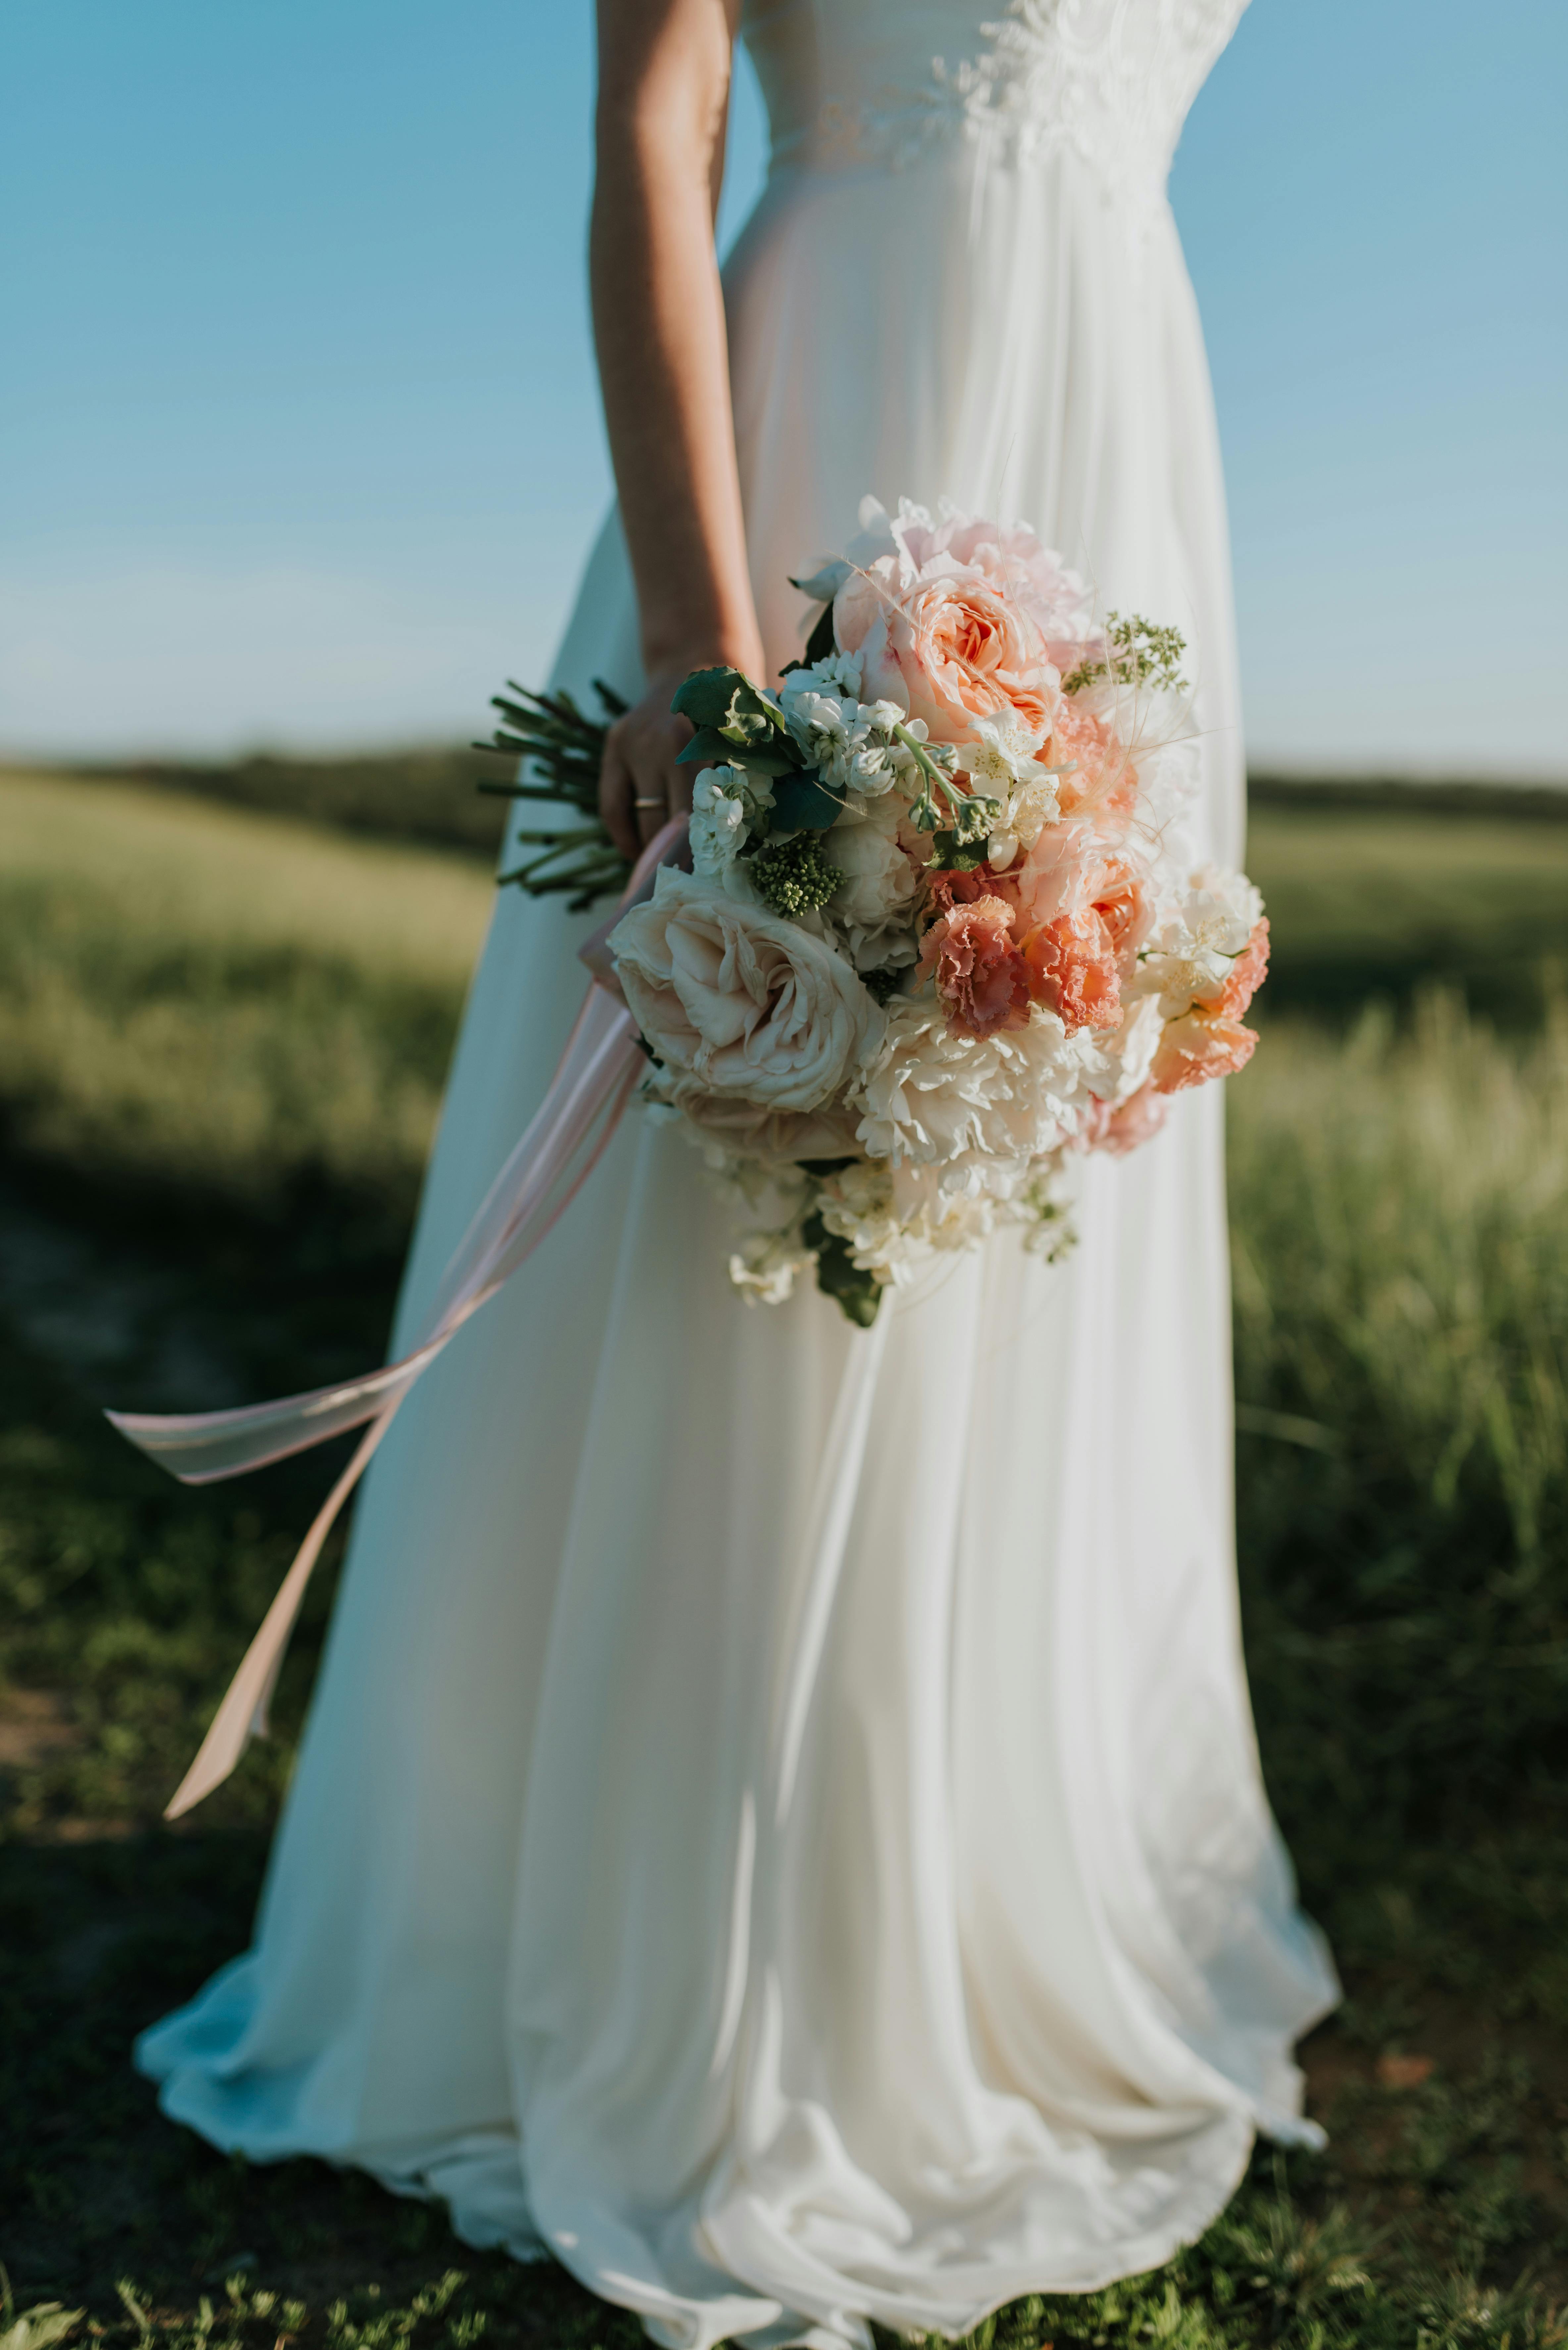 A bride on her own | Source: Pexels